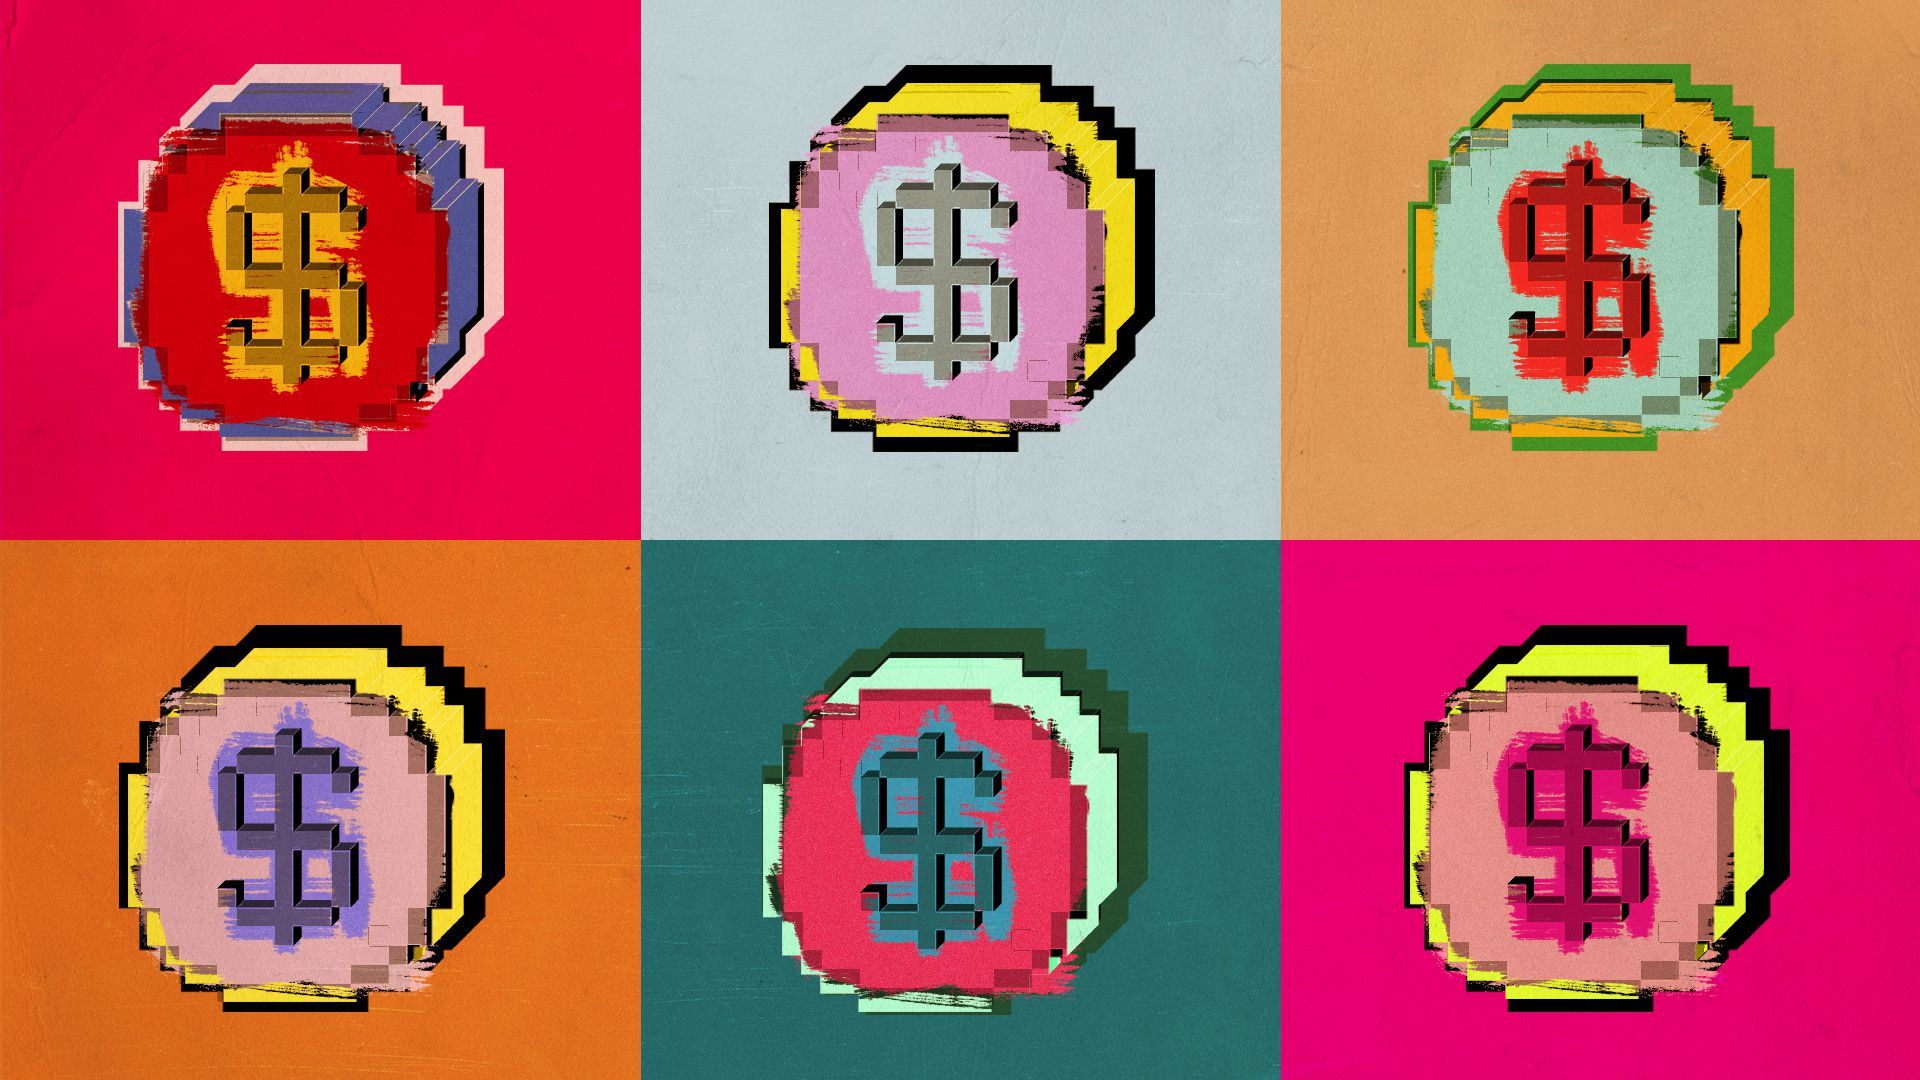 Illustration of a grid of coins in a Pop Art style.